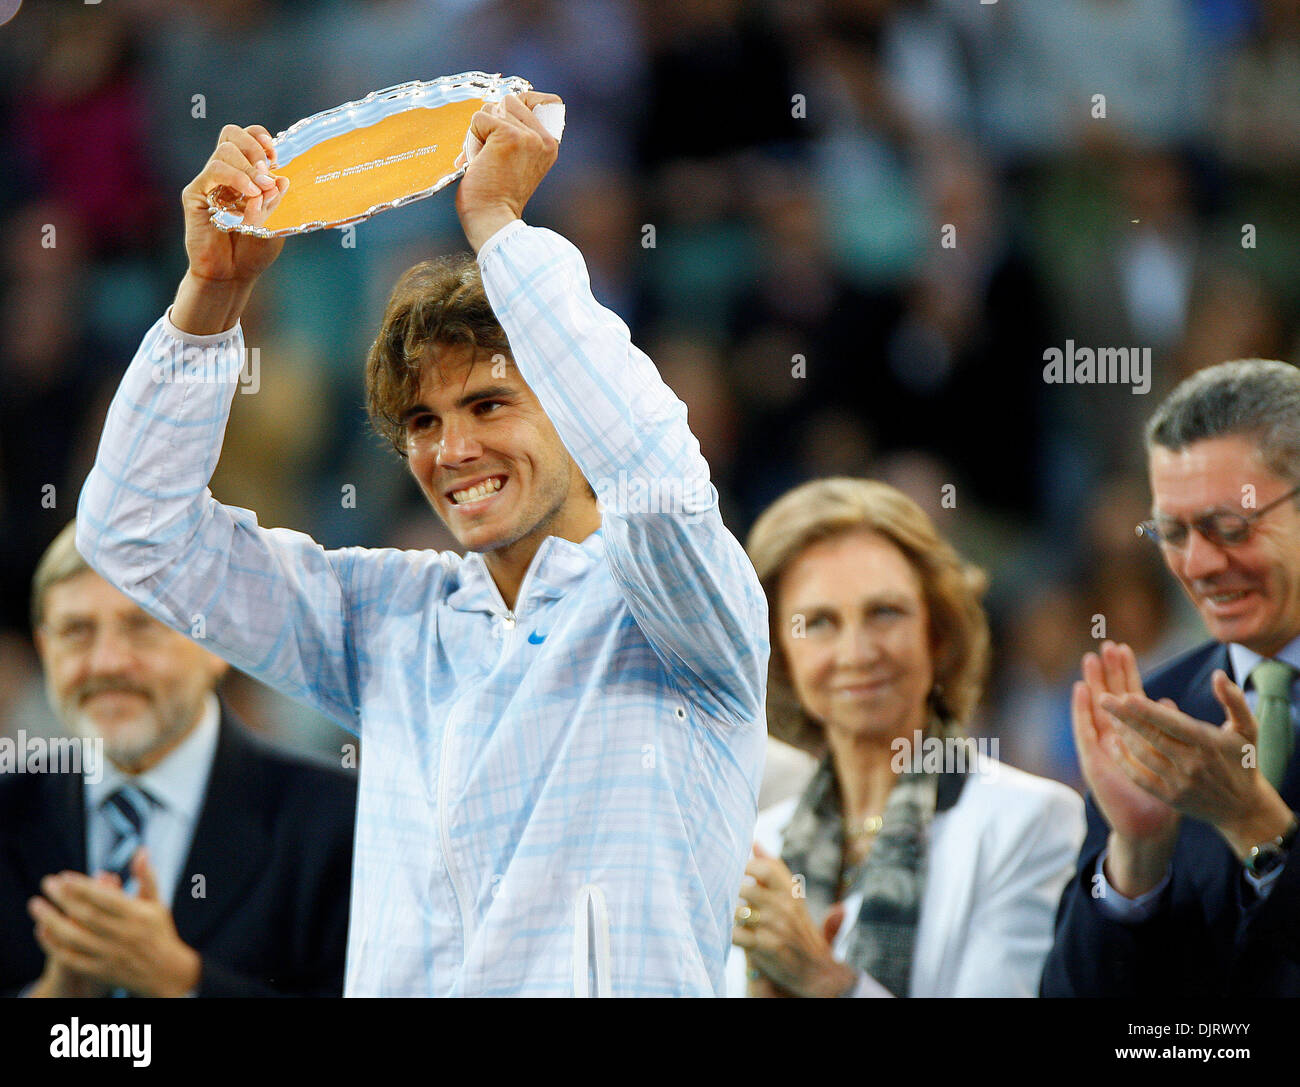 May 16, 2010 - Madrid, Spain - MADRID, SPAIN, 16th MAY 2010:  Rafael Nadal defeated defending champion Roger Federer 6-4 7-6 in the Madrid Masters final, sealing an historic third Masters of the season at the Caja Magica, Madrid, Spain. (Credit Image: © Michael Cullen/Southcreek Global/ZUMApress.com) Stock Photo